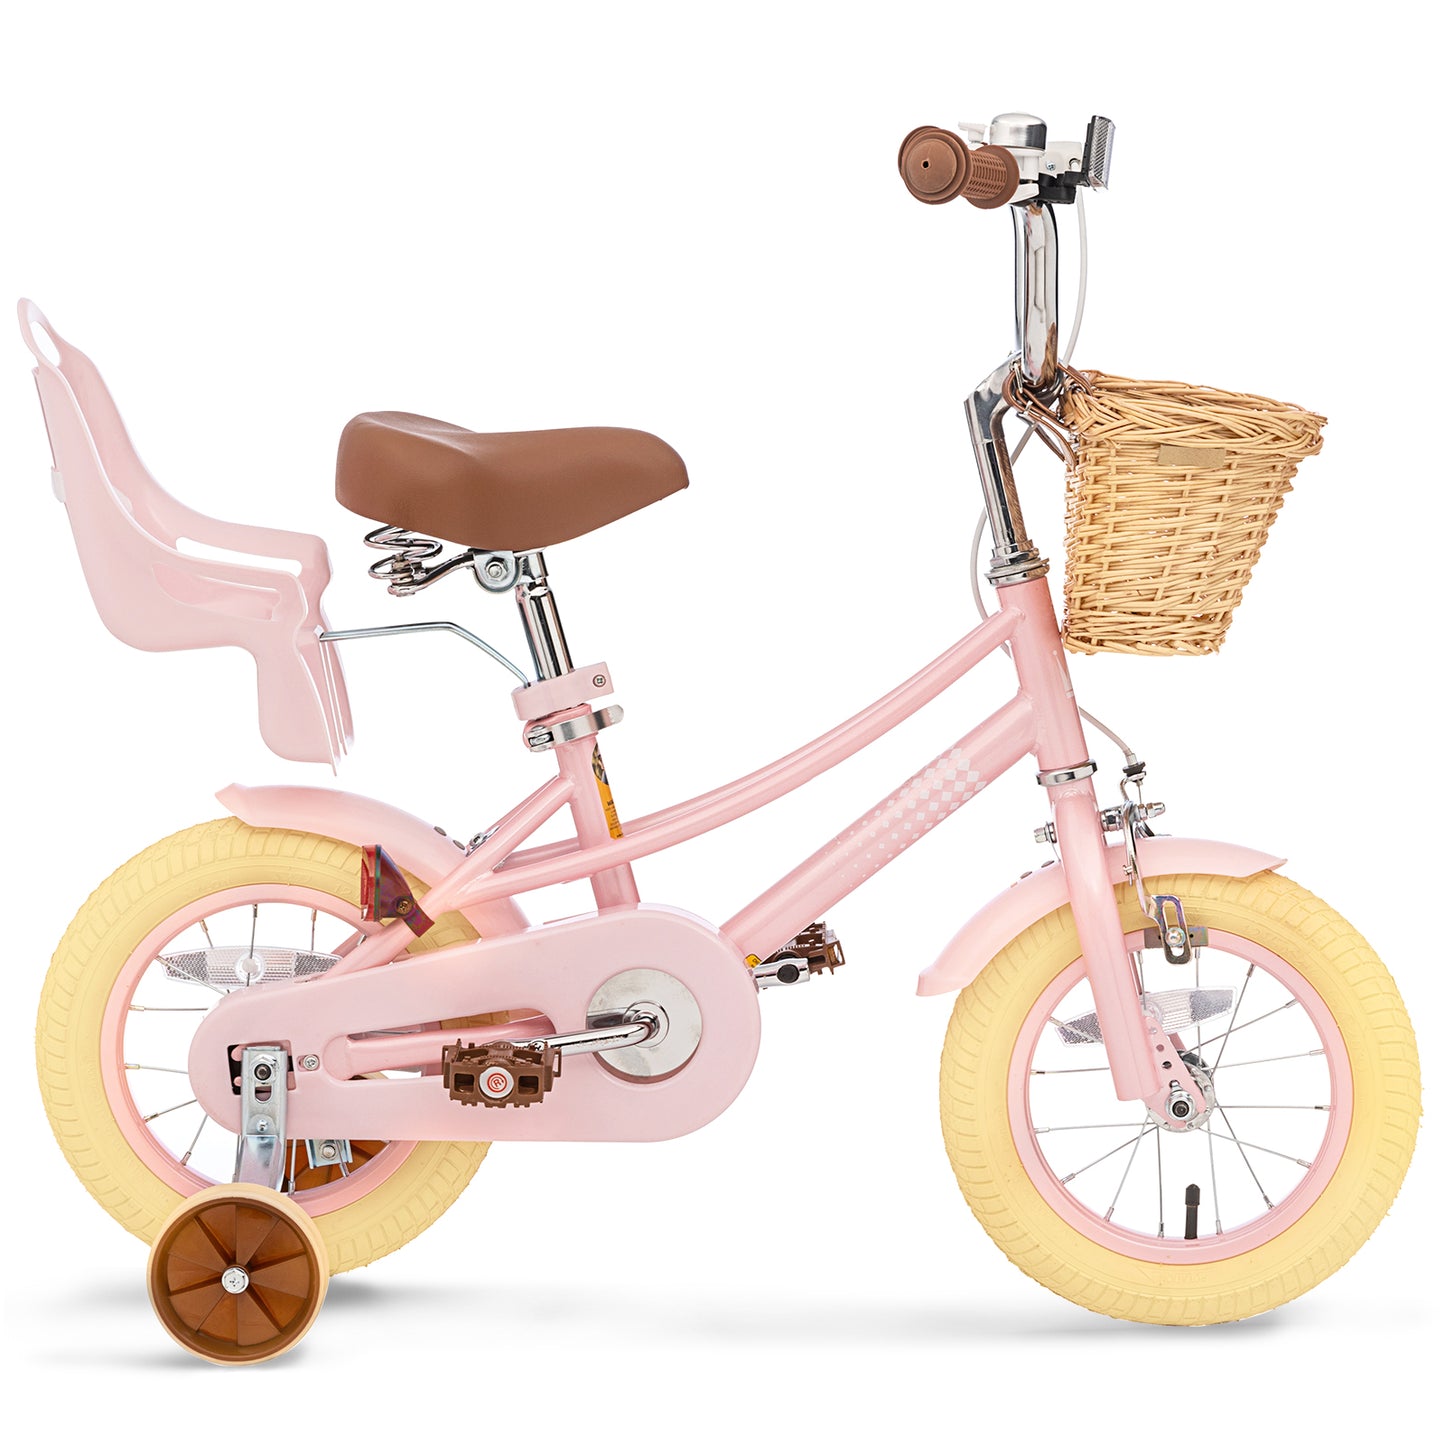 XJD 12 inch Kids Girls Bike for Ages 2-4 Years Child, Toddler Bike with Basket and Bell Training Wheels, Adjustable Seat Handlebar Height